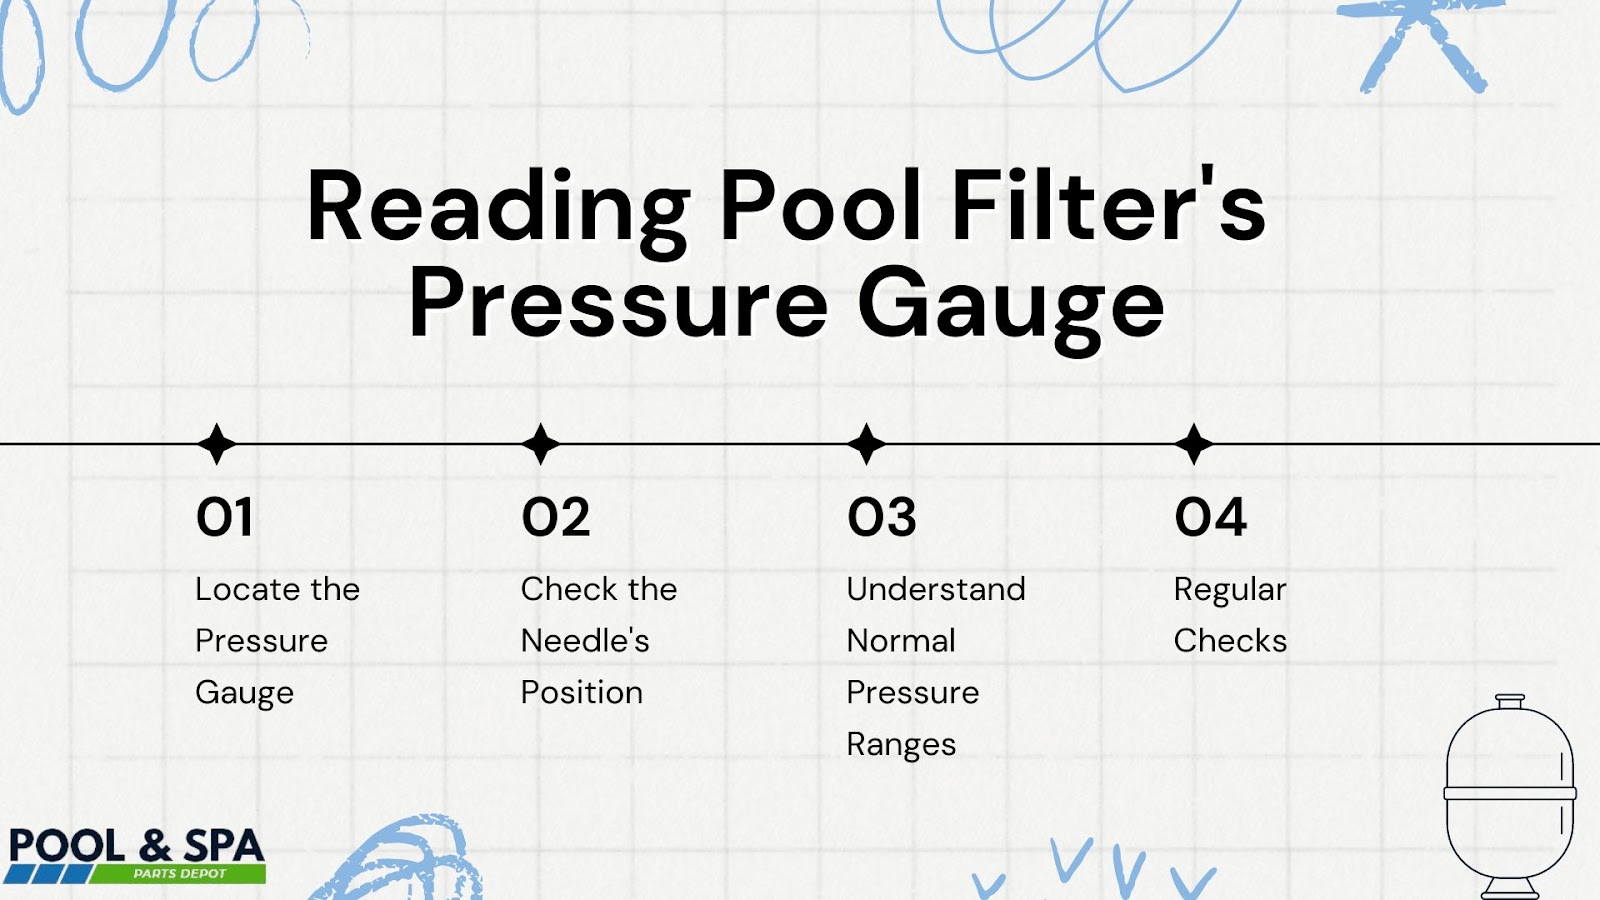 How to Read Your Pool Filter's Pressure Gauge